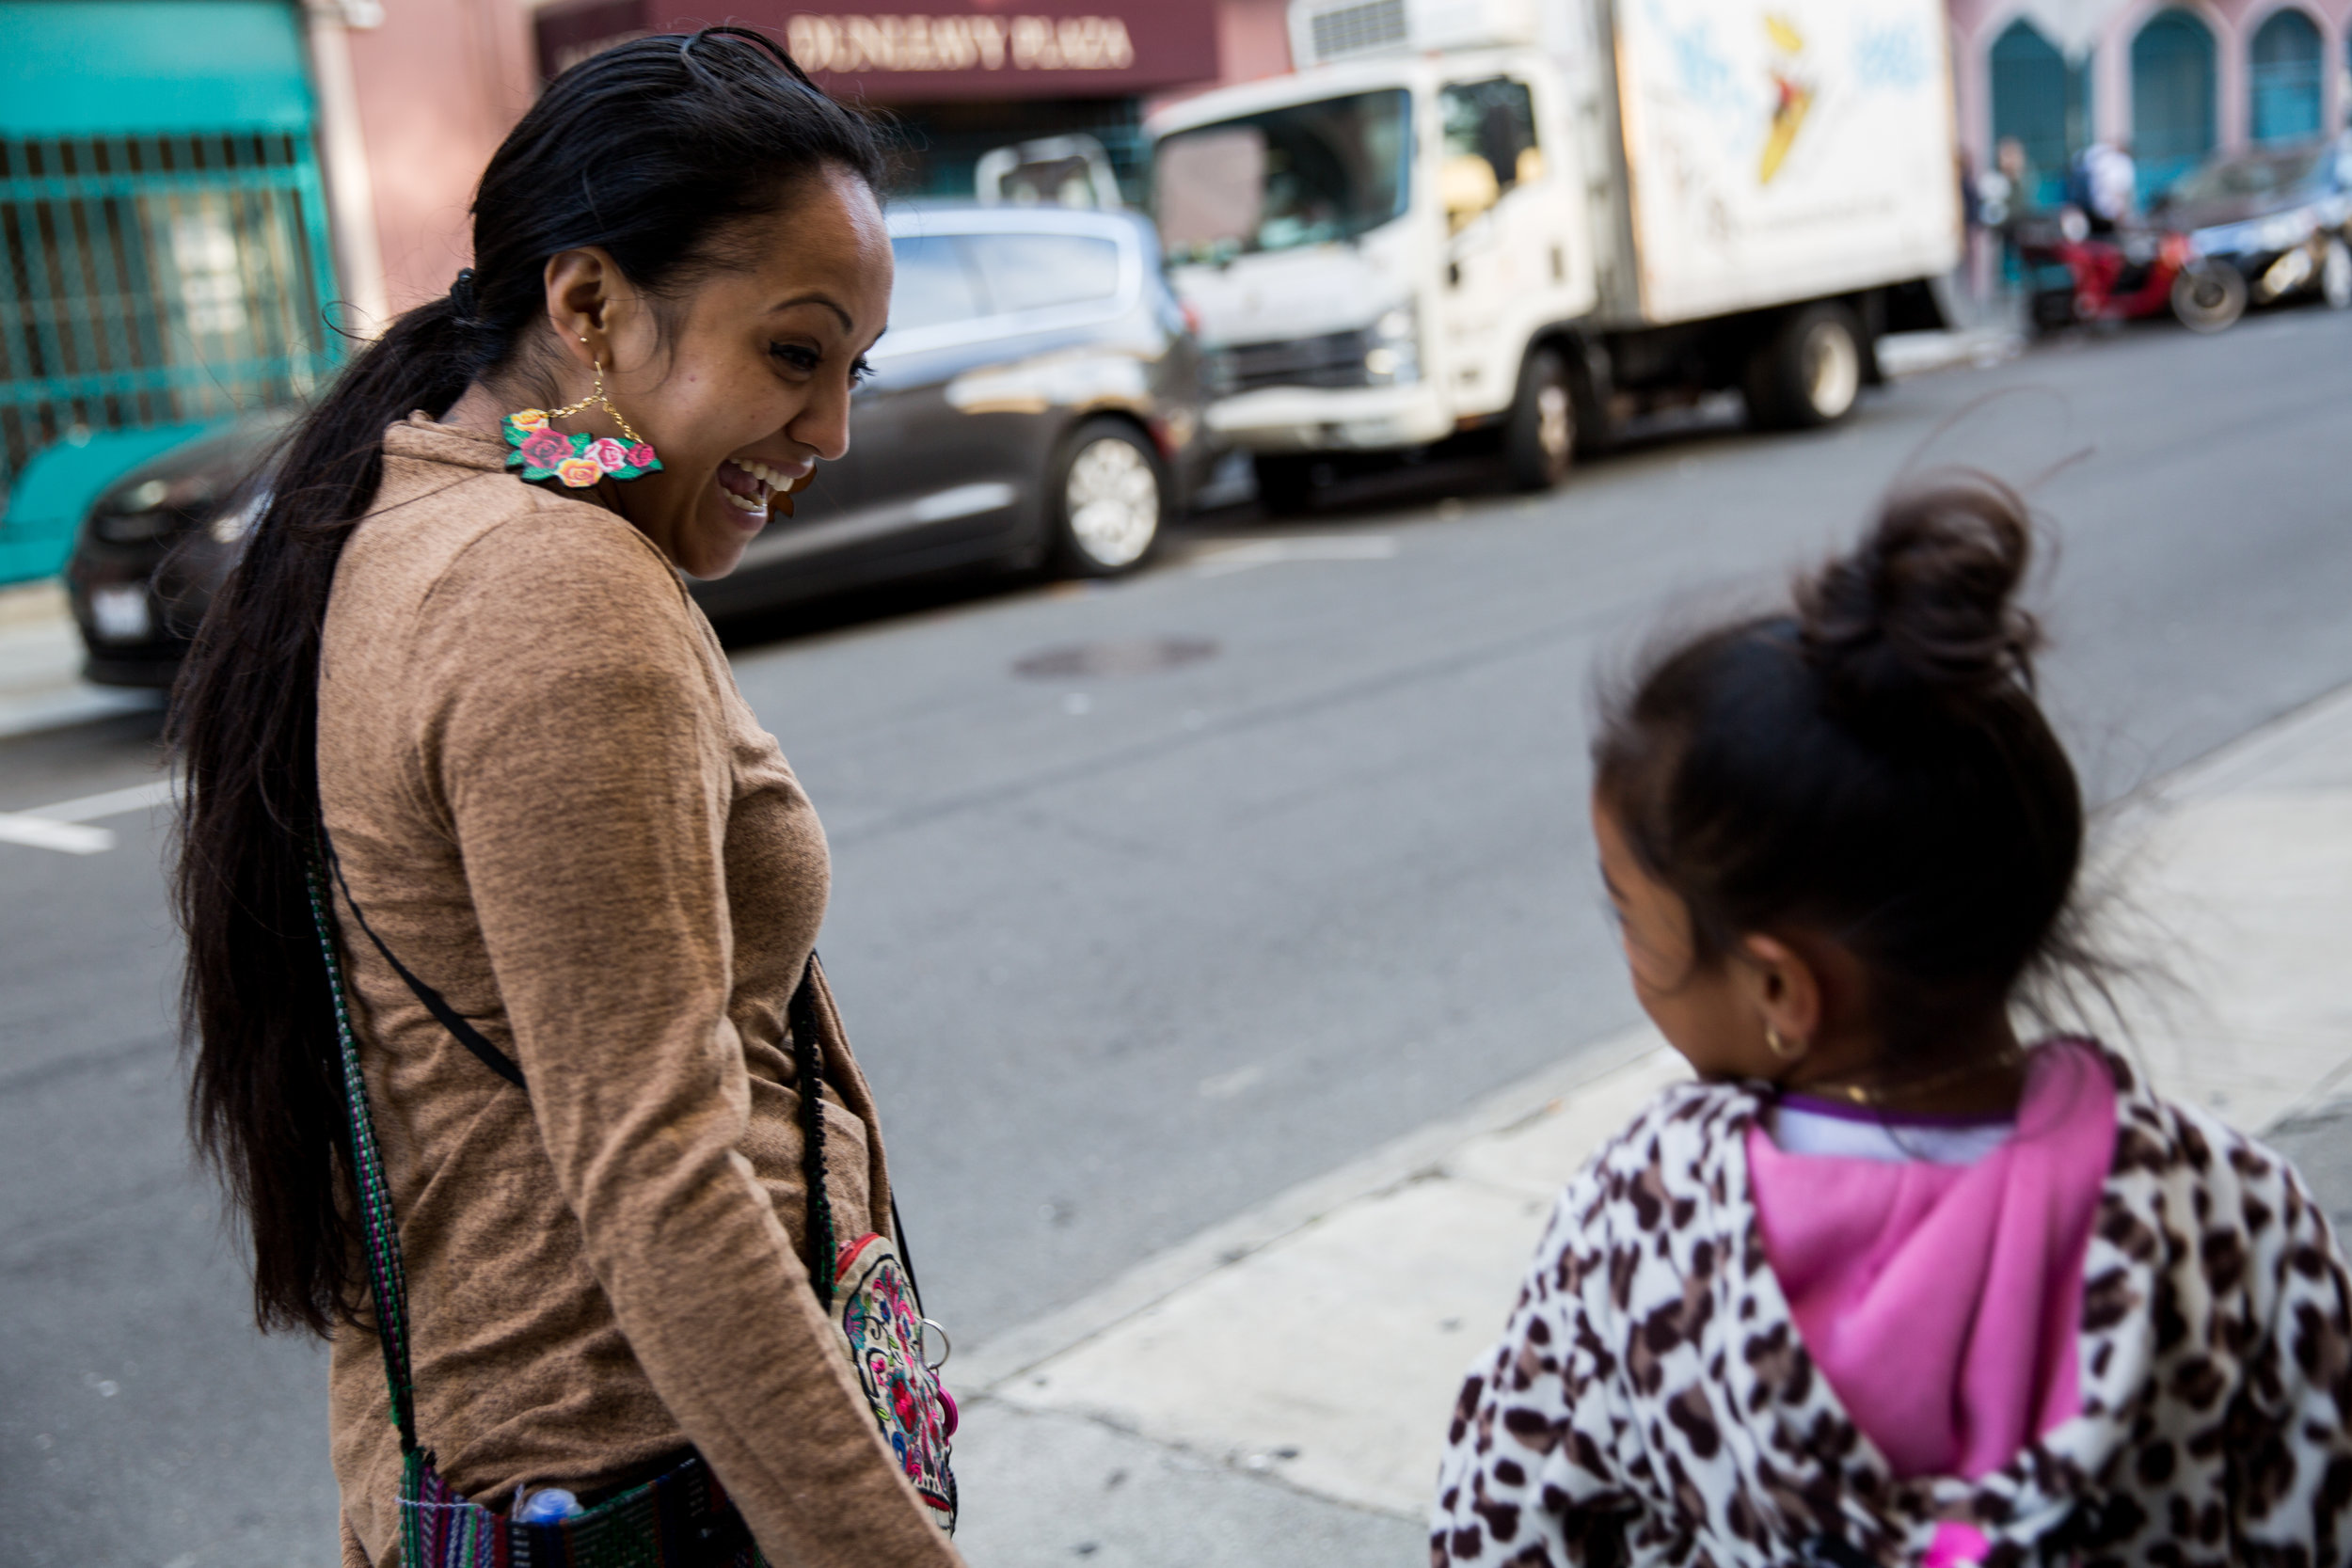  Julia Arroyo walks to the park with her daughter Guillermina, who she calls Baby G, after picking her up from school, where it was pajama day. Julia's daughter was one of the driving forces that helped her push herself to become the version of herse